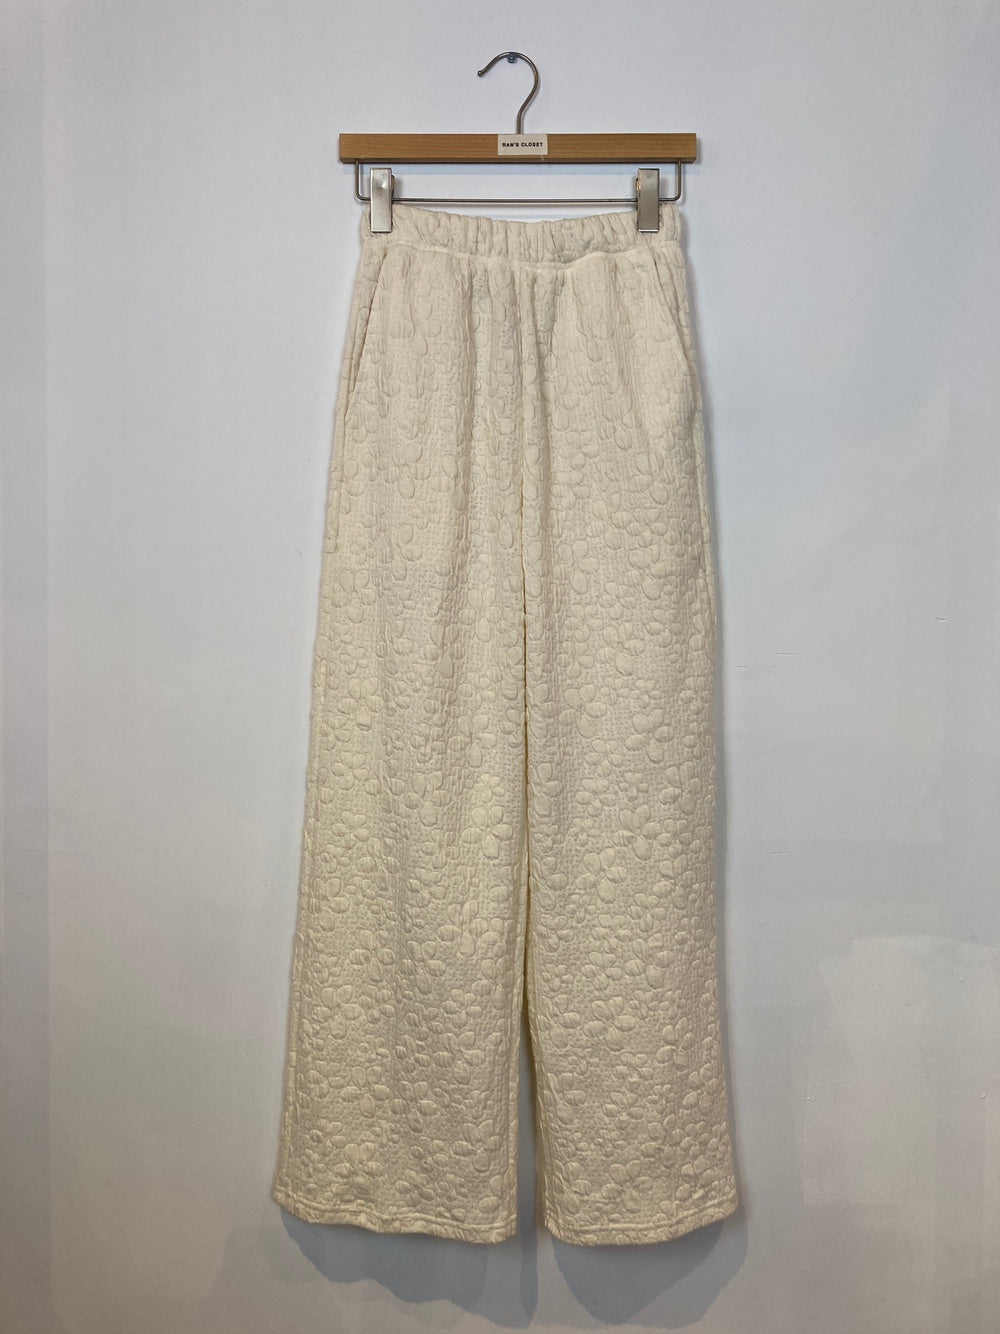 Street Brand Elastic Waist Floral Pants in Blue and White